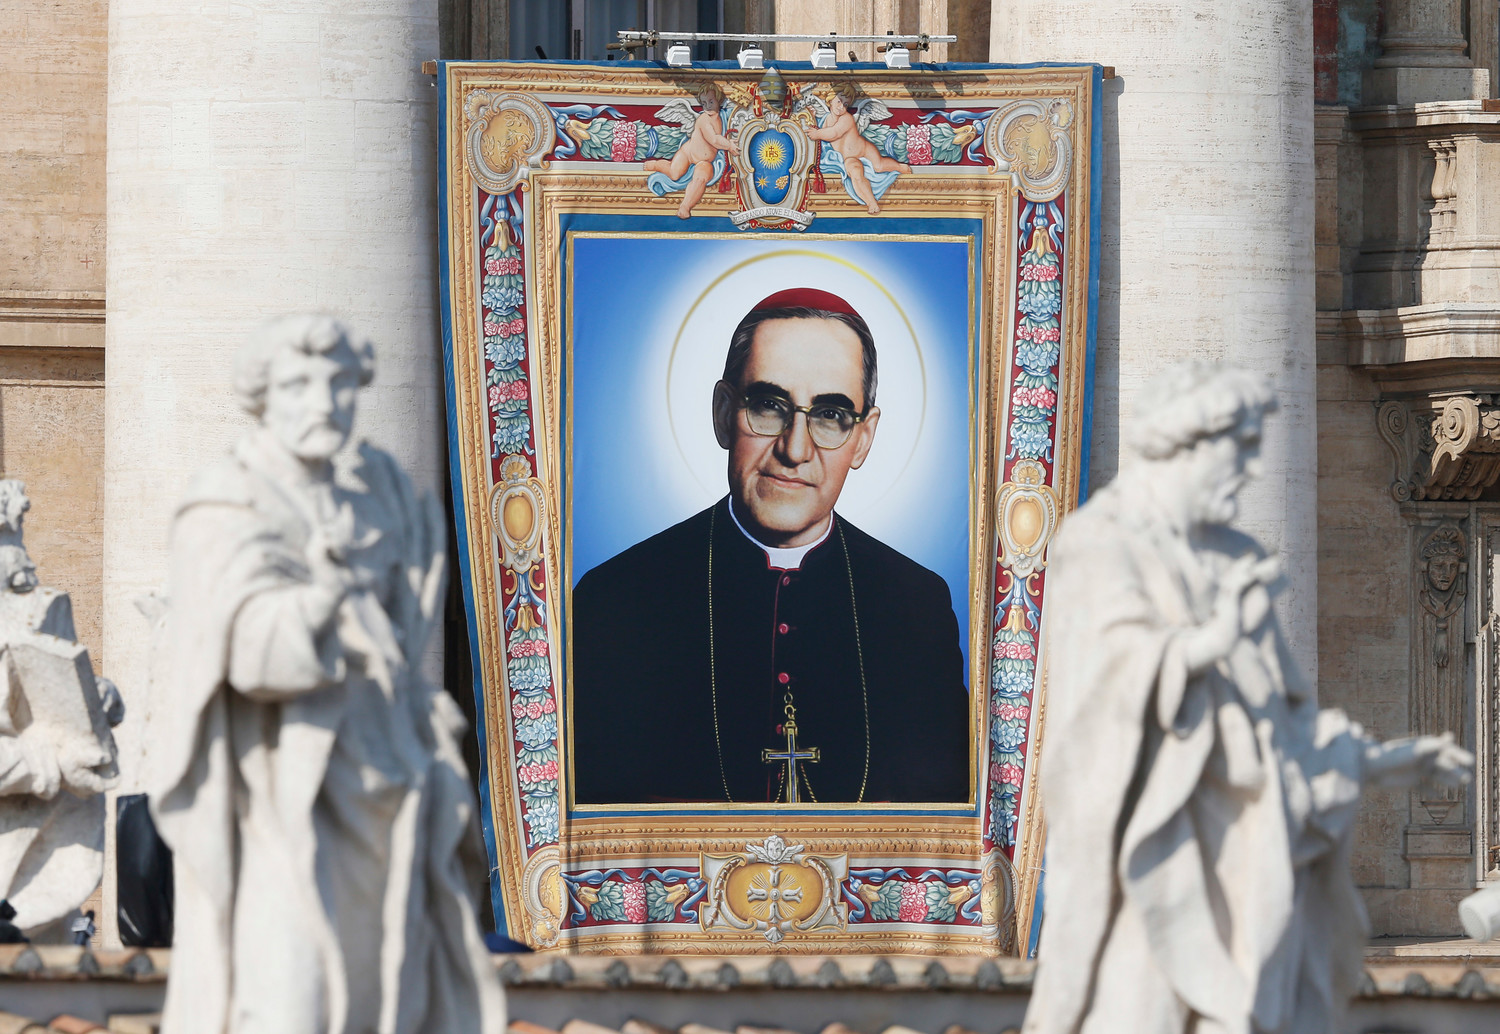 A banner of new St. Oscar Romero hangs from the facade of St. Peter’s Basilica as Pope Francis celebrates the canonization Mass for seven new saints in St. Peter’s Square at the Vatican Oct. 14.